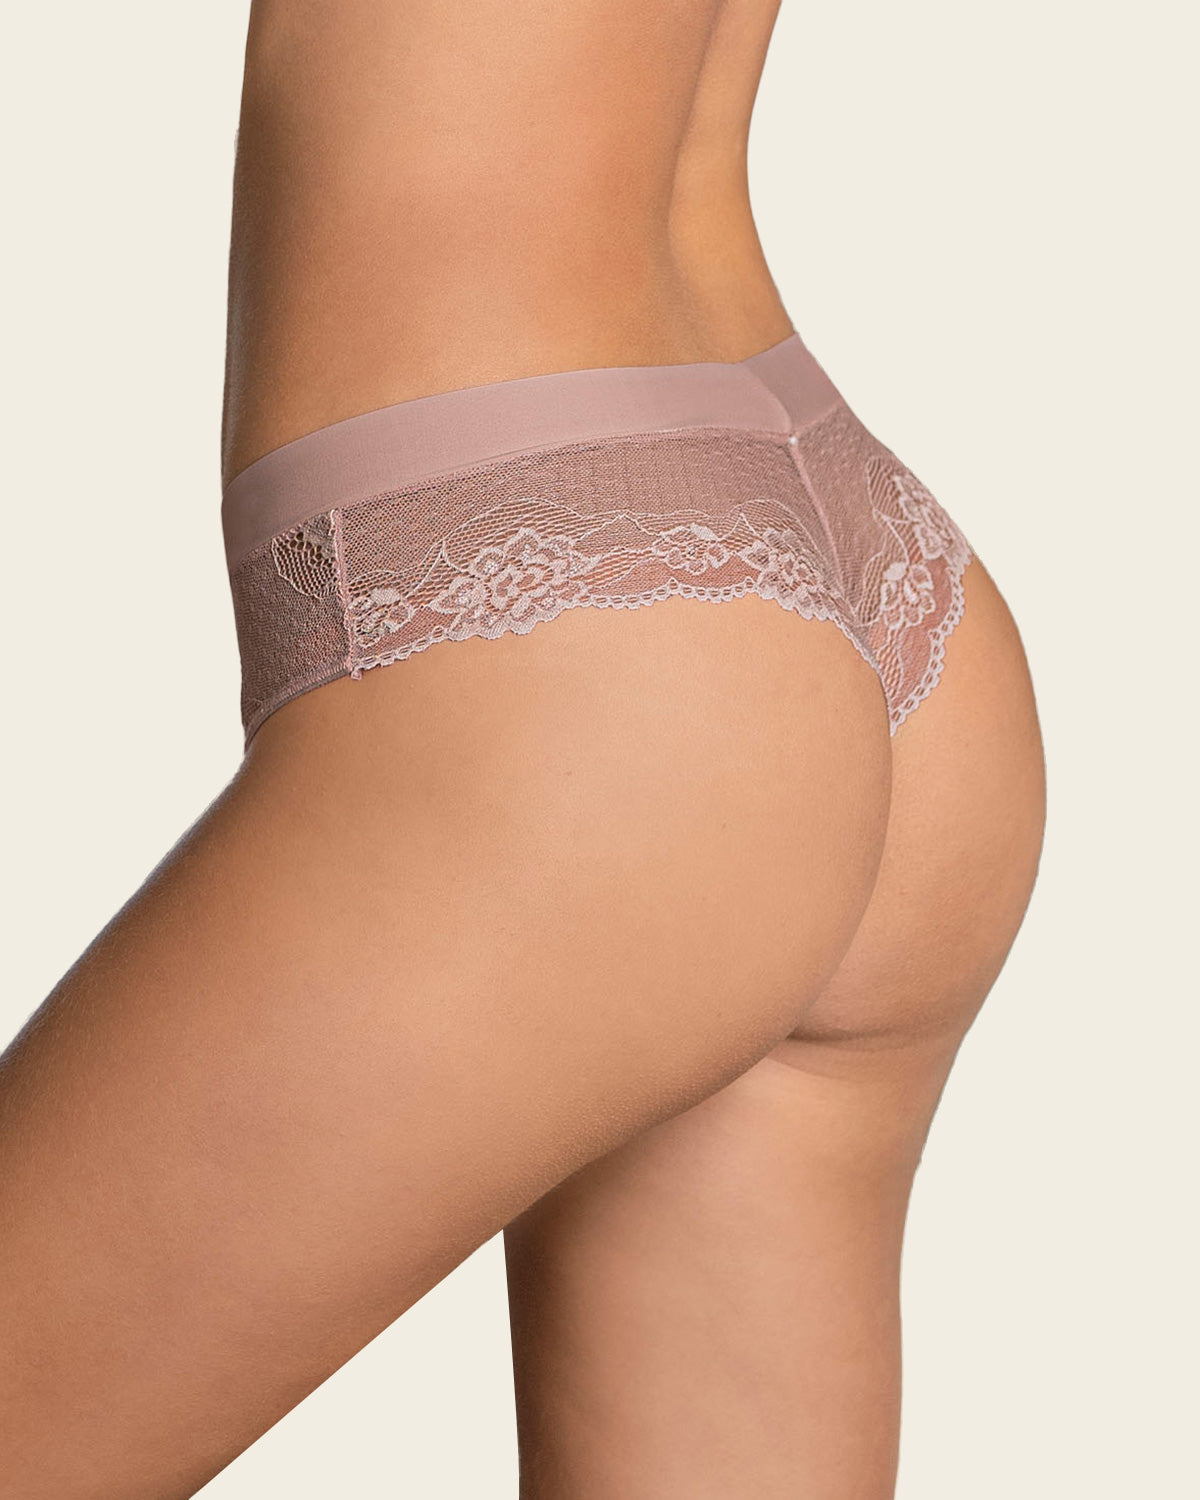 Leonisa Floral Lace Cheeky Panties for Women - Soft Mid Rise